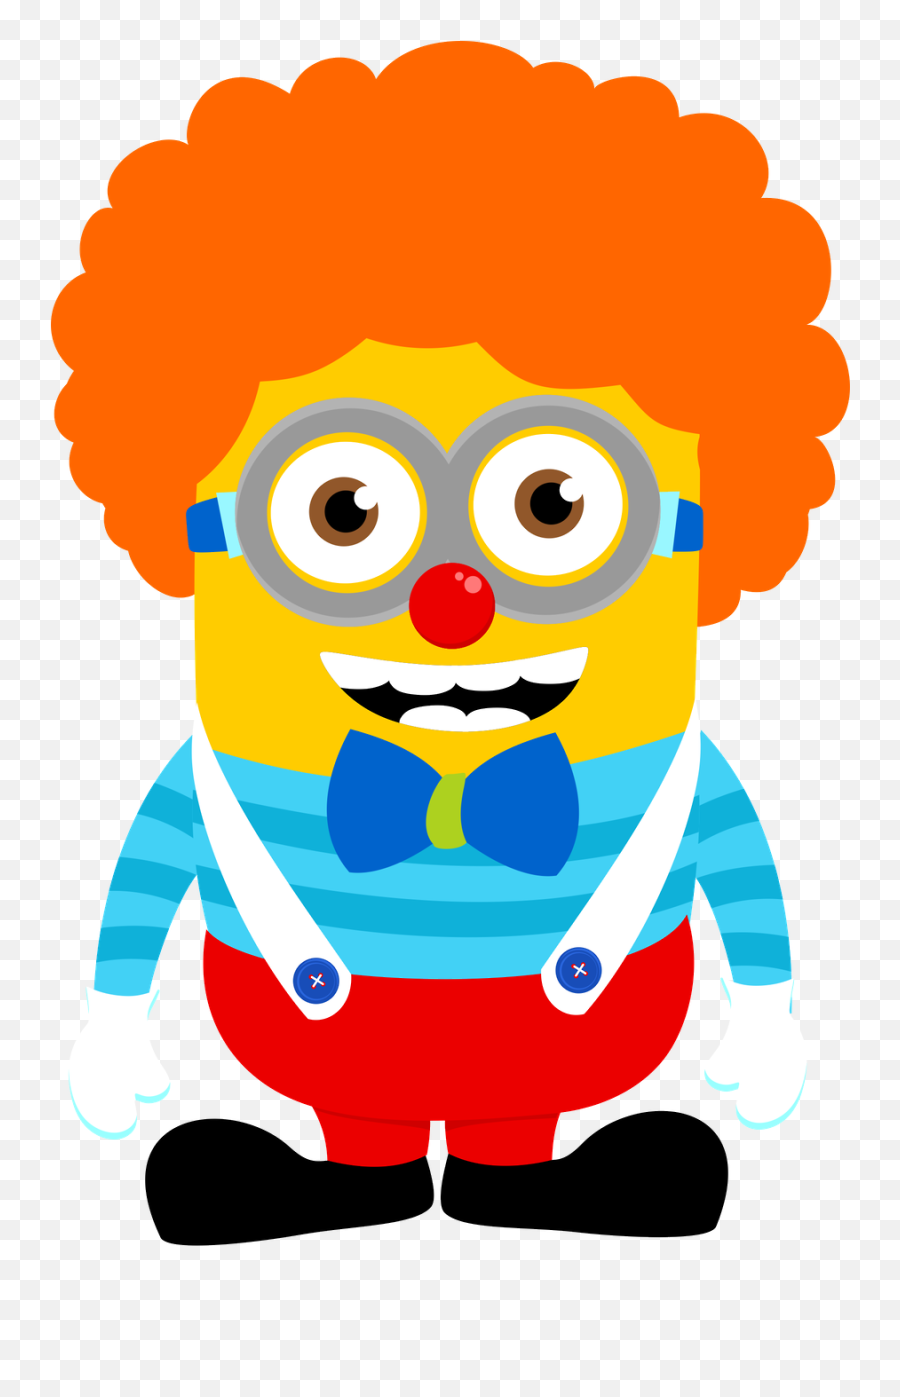 Minions - Clown Minion Full Size Png Download Seekpng Animation Good Morning Gif,Minion Png